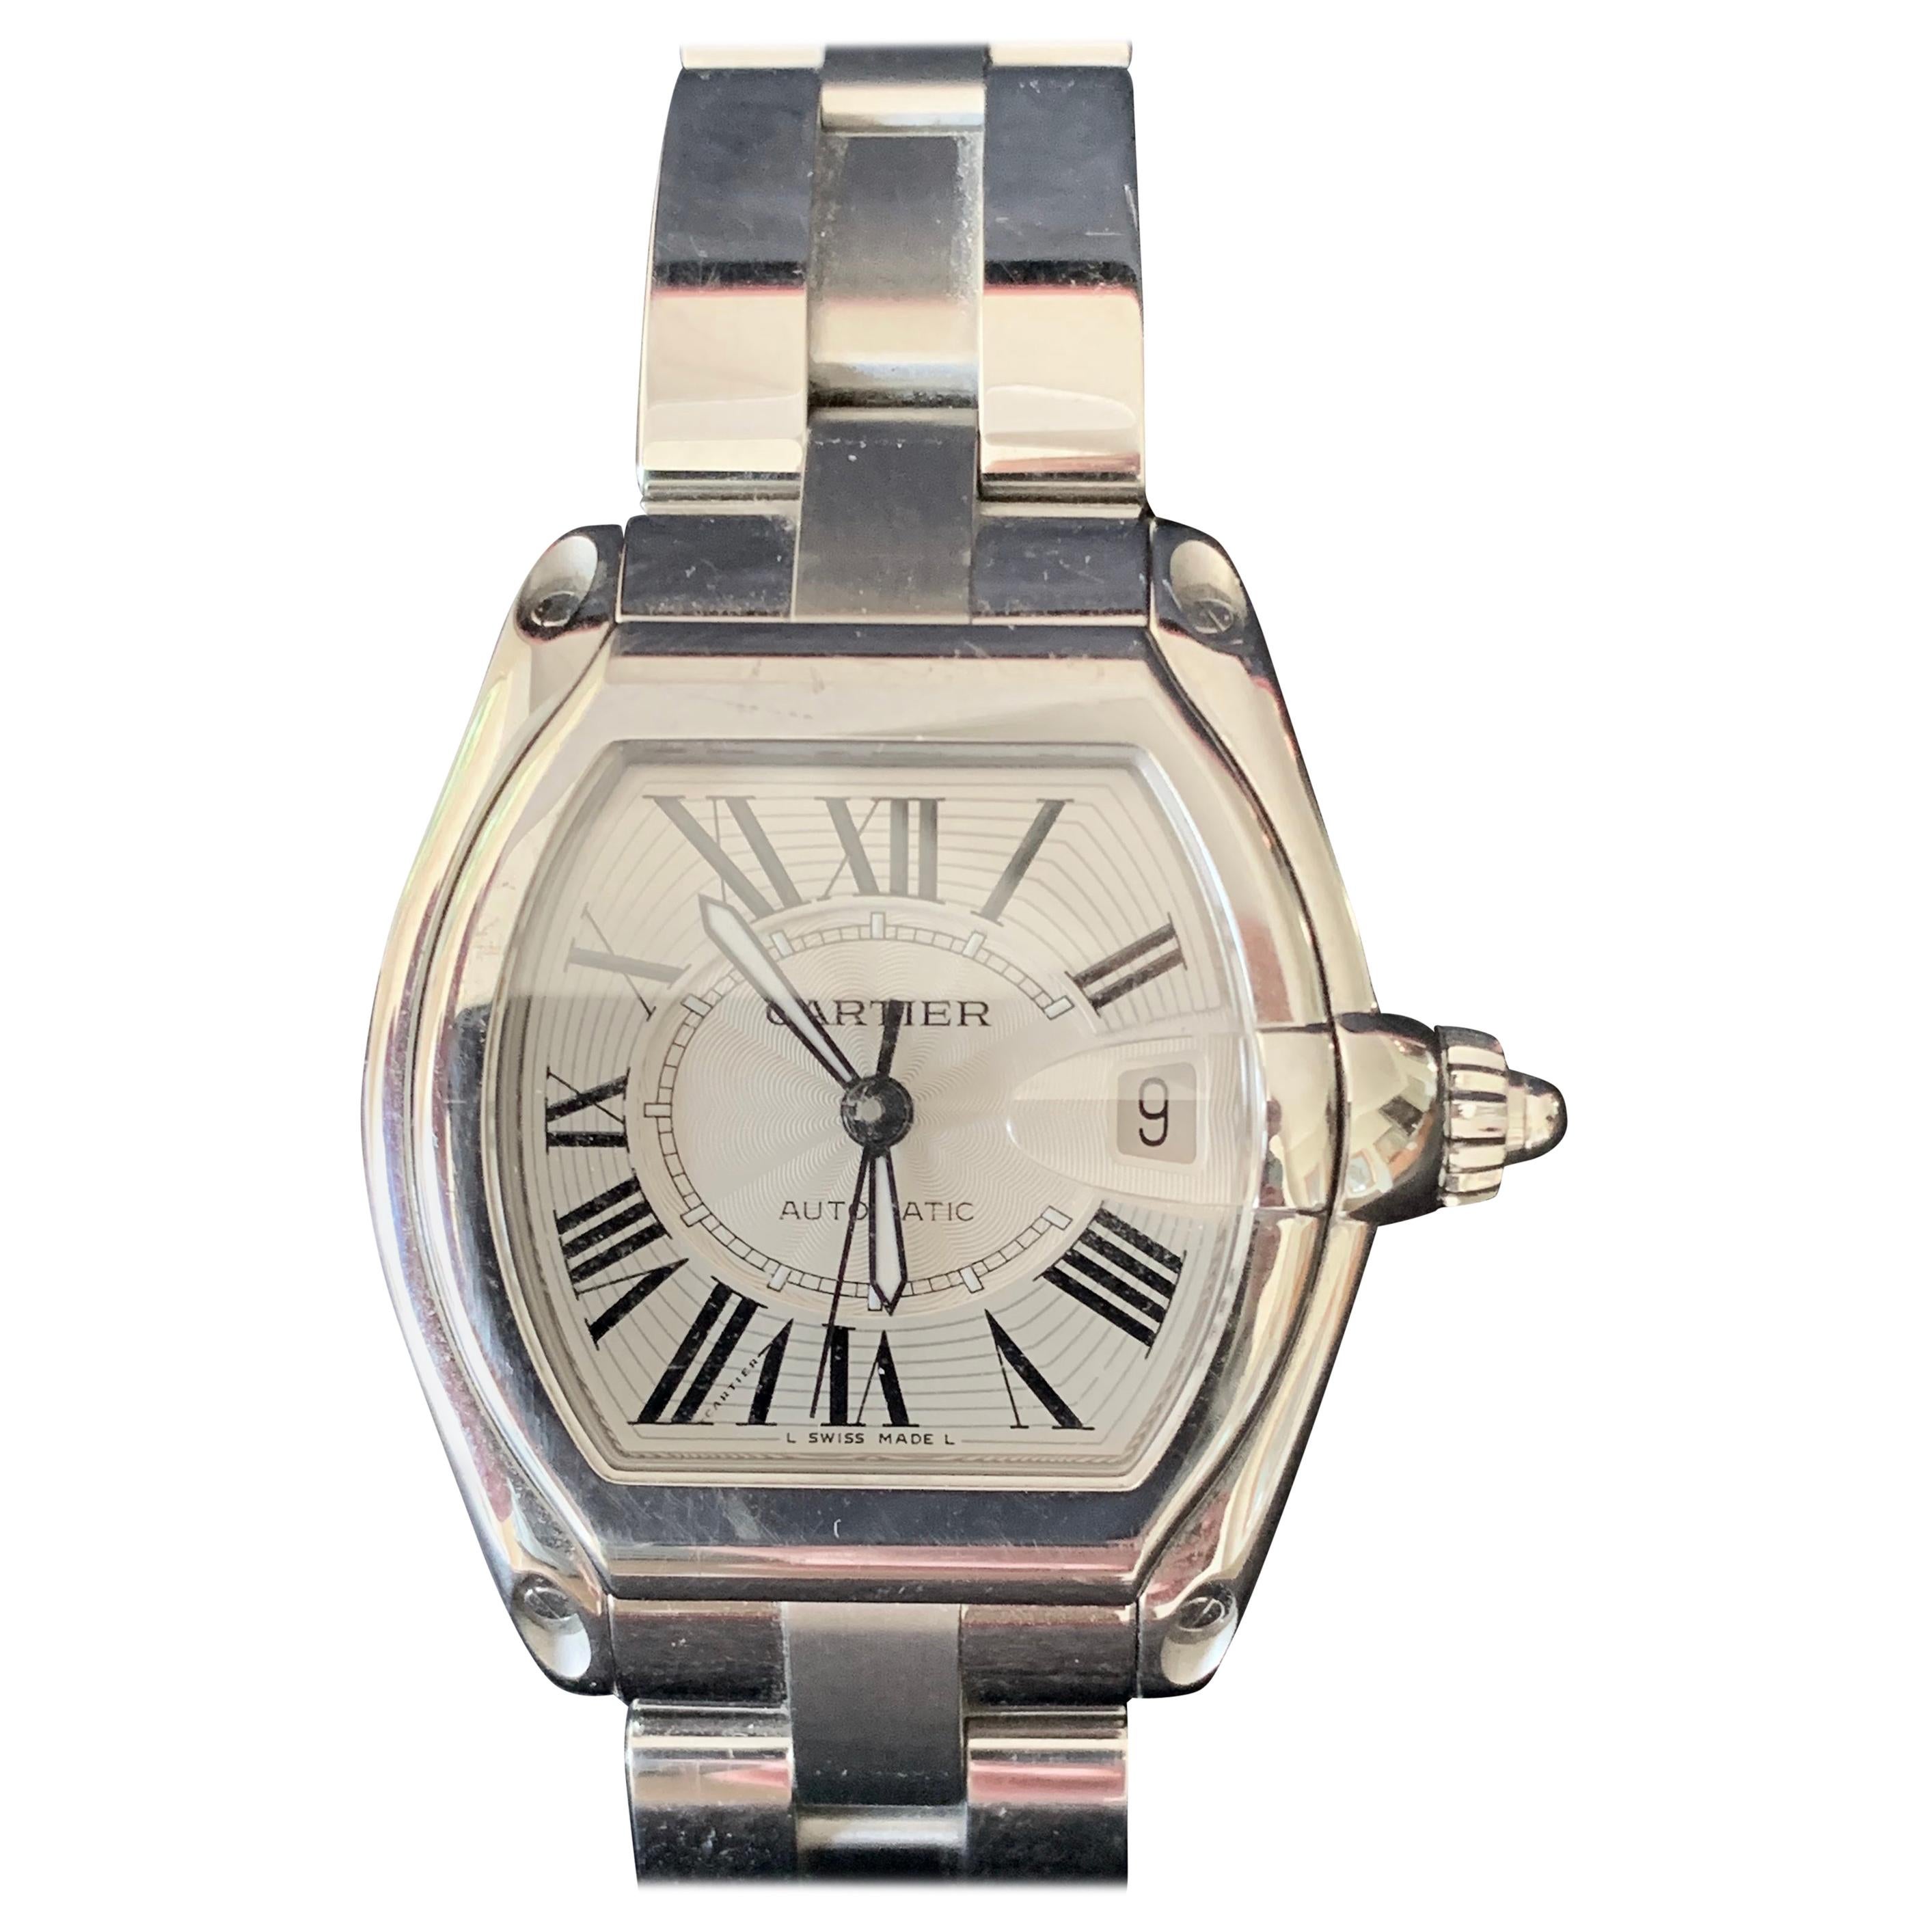 Vintage Cartier Roadster Automatic 2510 Watch